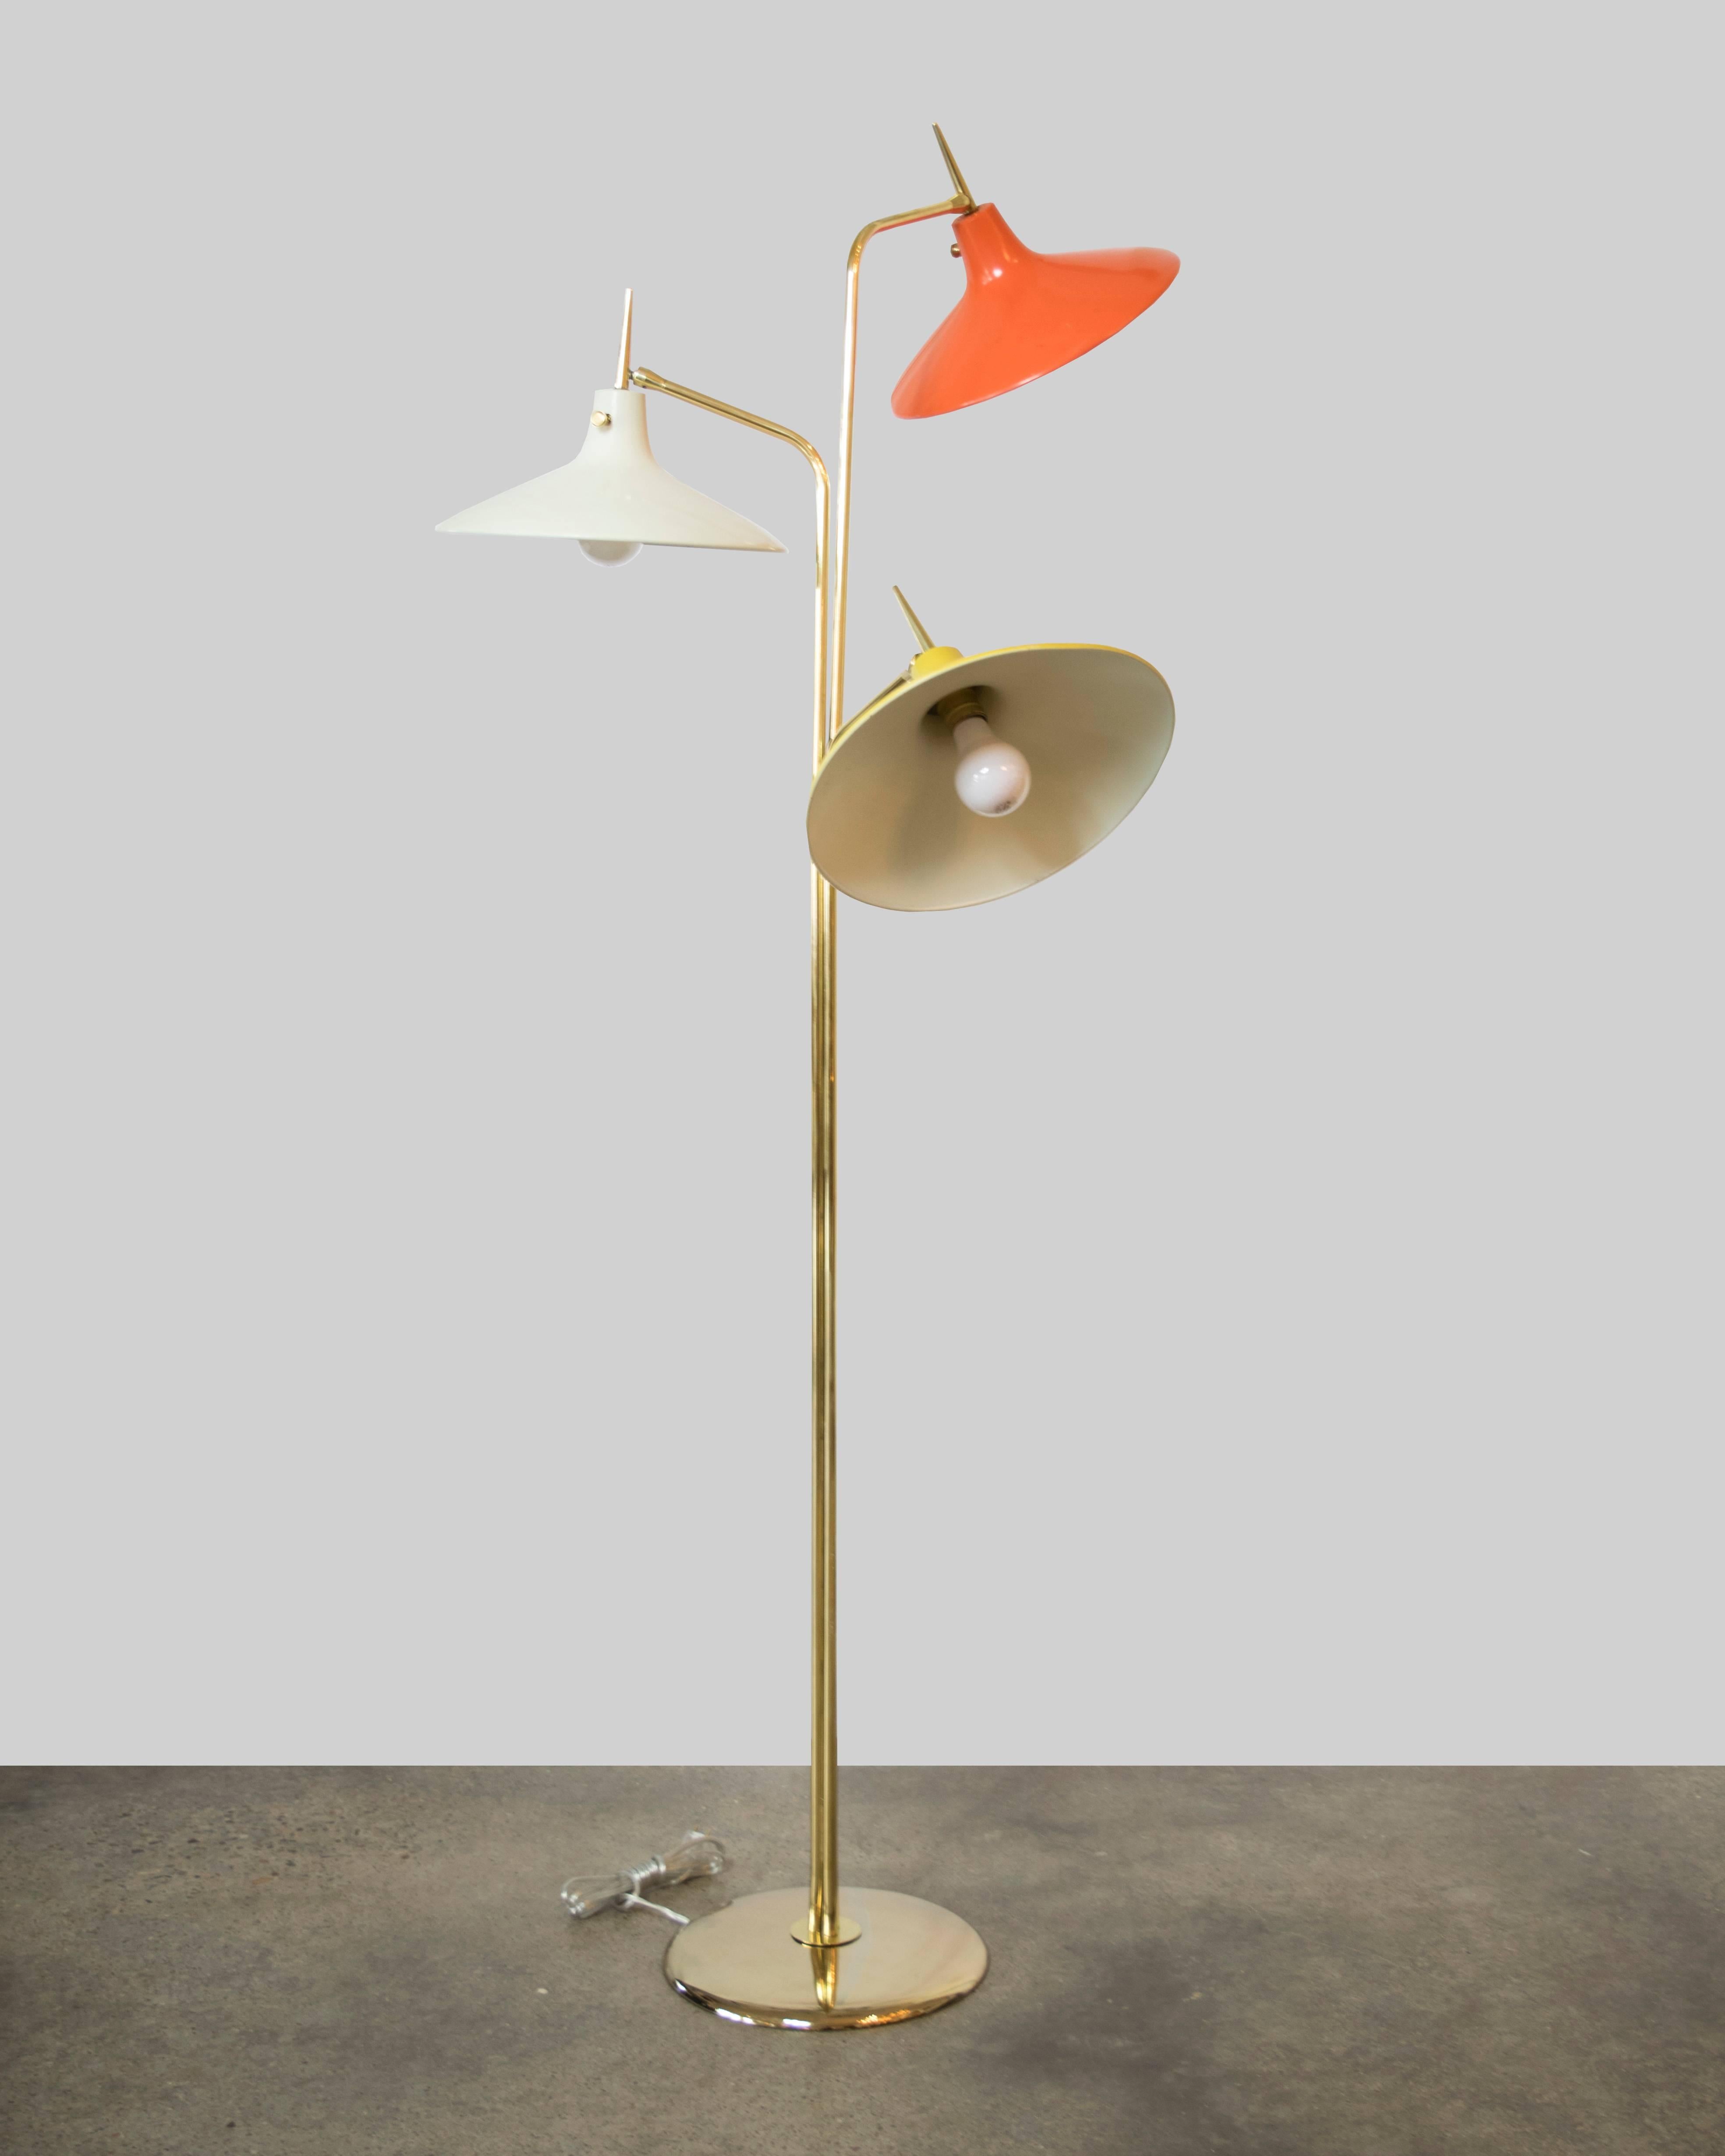 Beautiful three-light saucer shape brass and enamel floor lamp by Gio Ponti with multicolored shades, one orange, one yellow, one off-white.